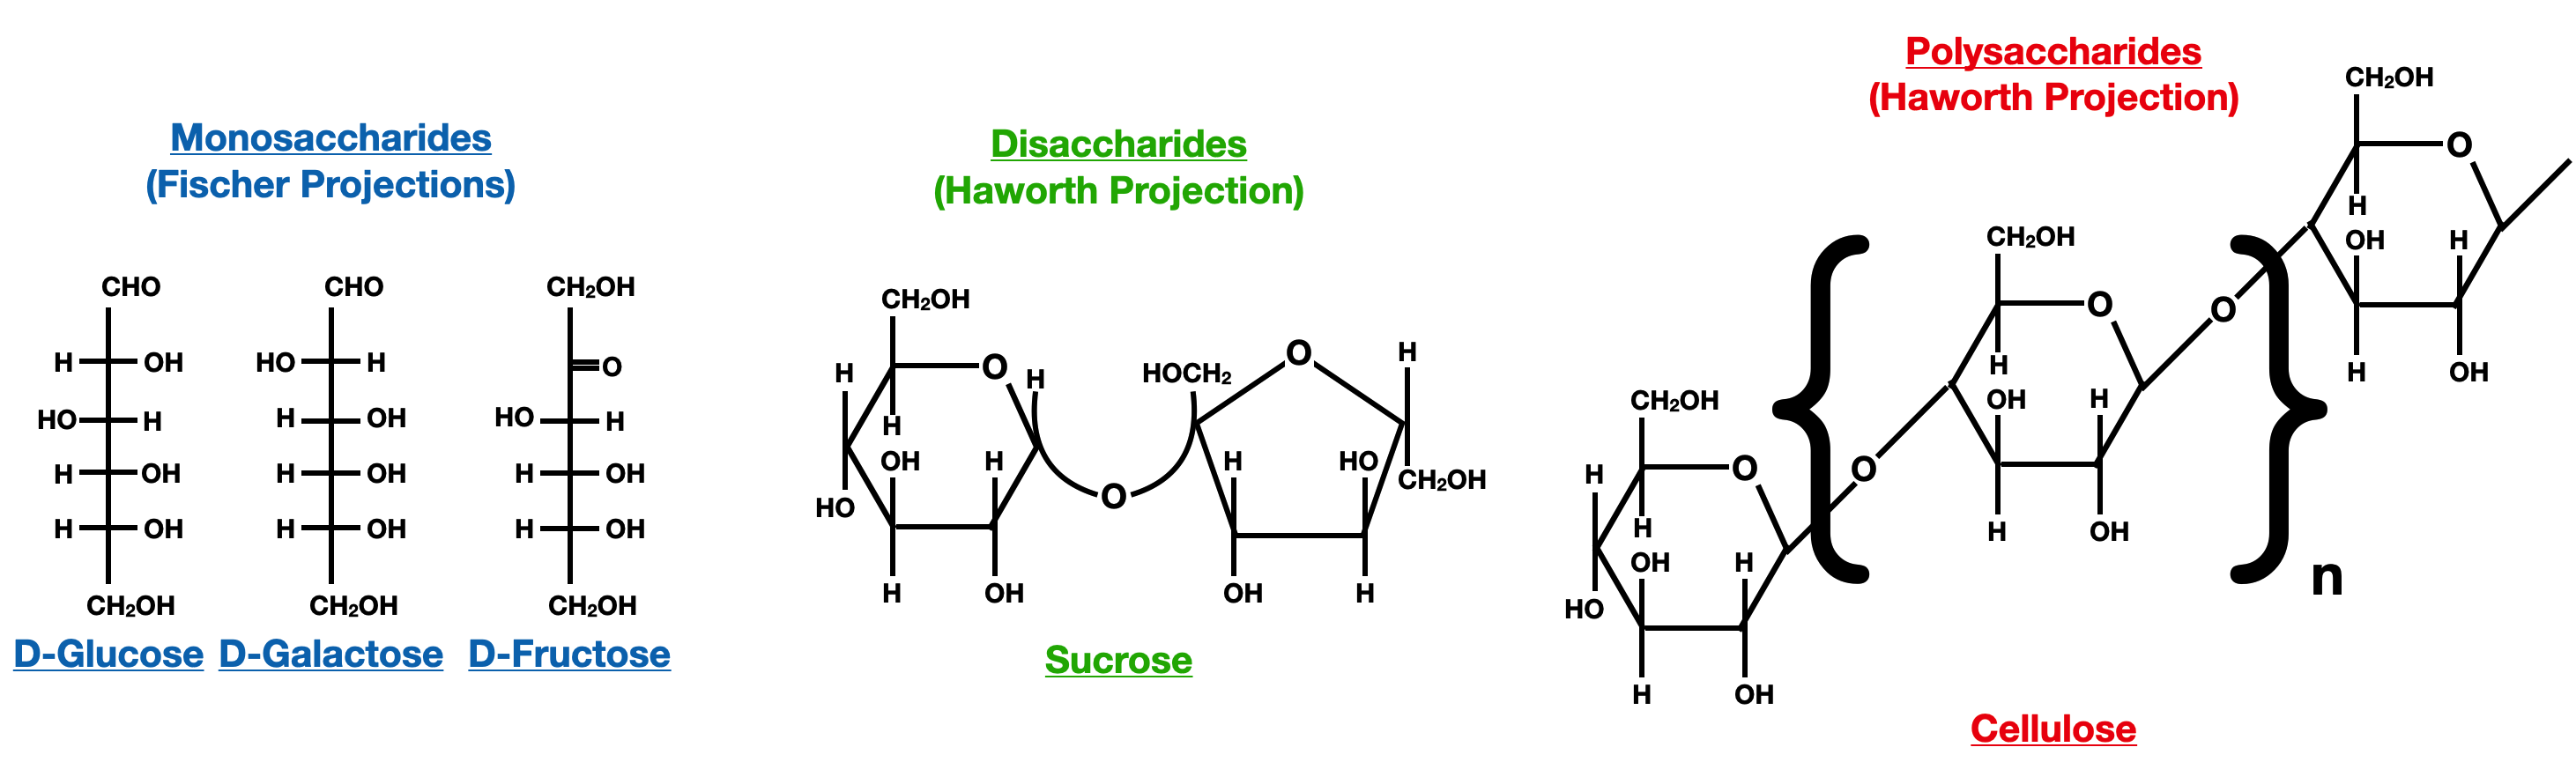 Introduction to Carbohydrates - monosaccharide disaccharide polysaccharide